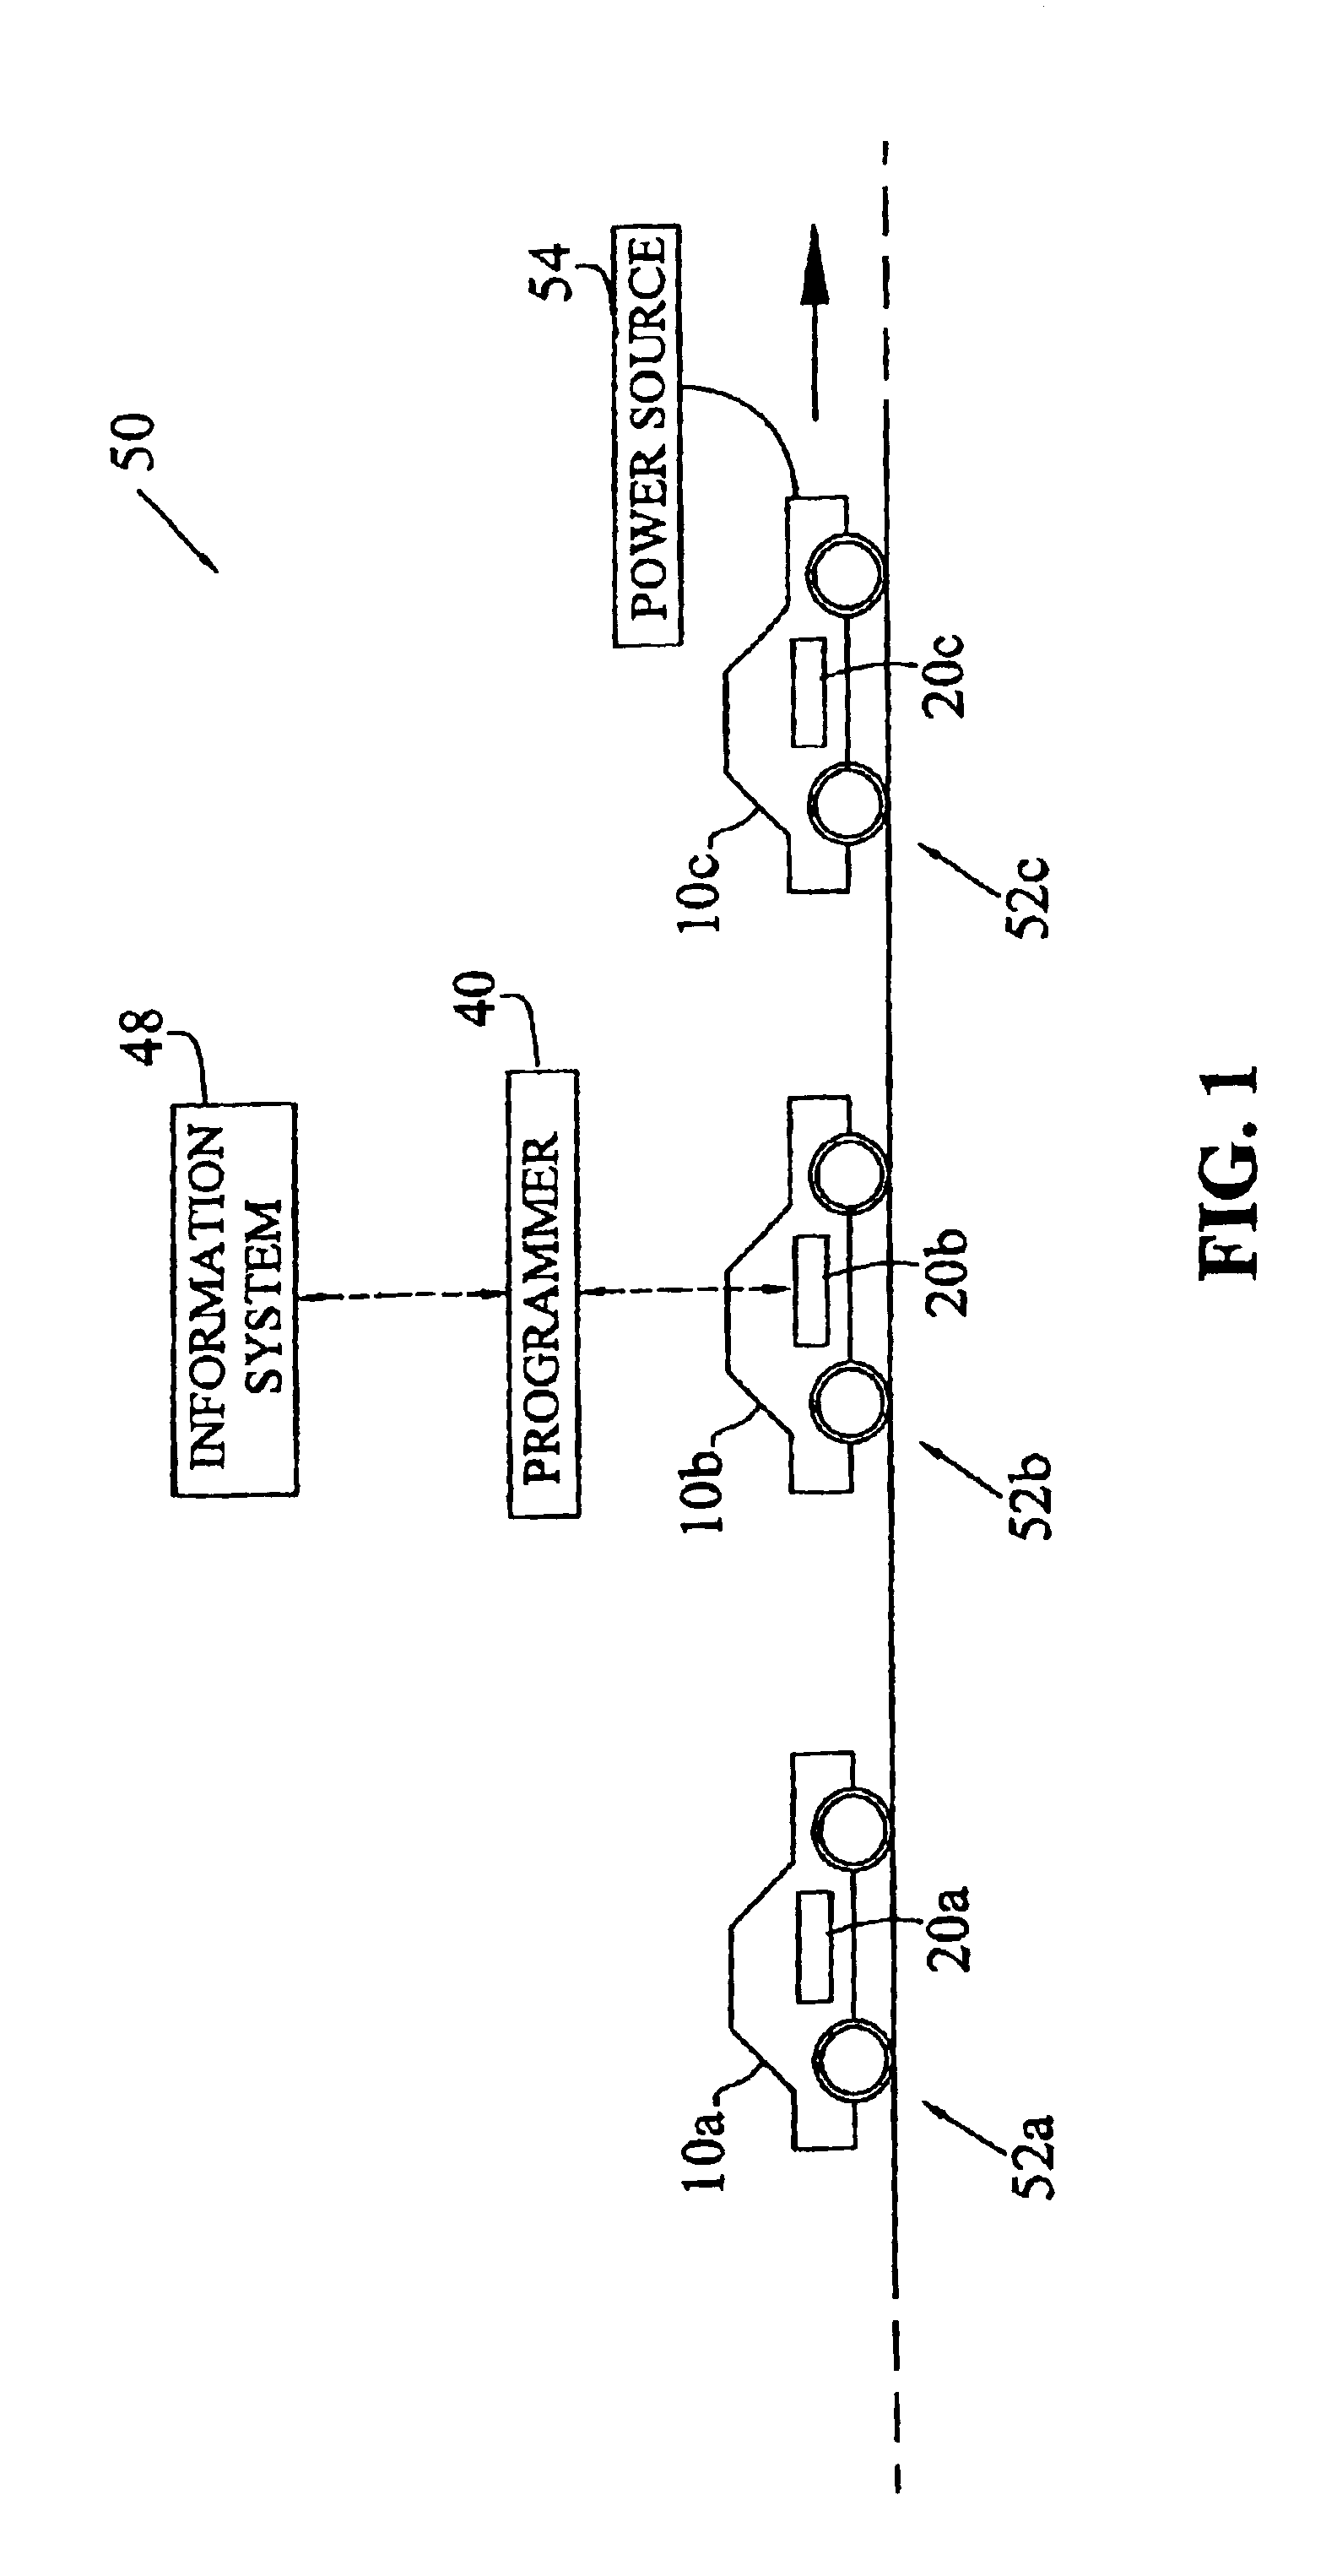 Method to provide off-line transfer of vehicle calibration data